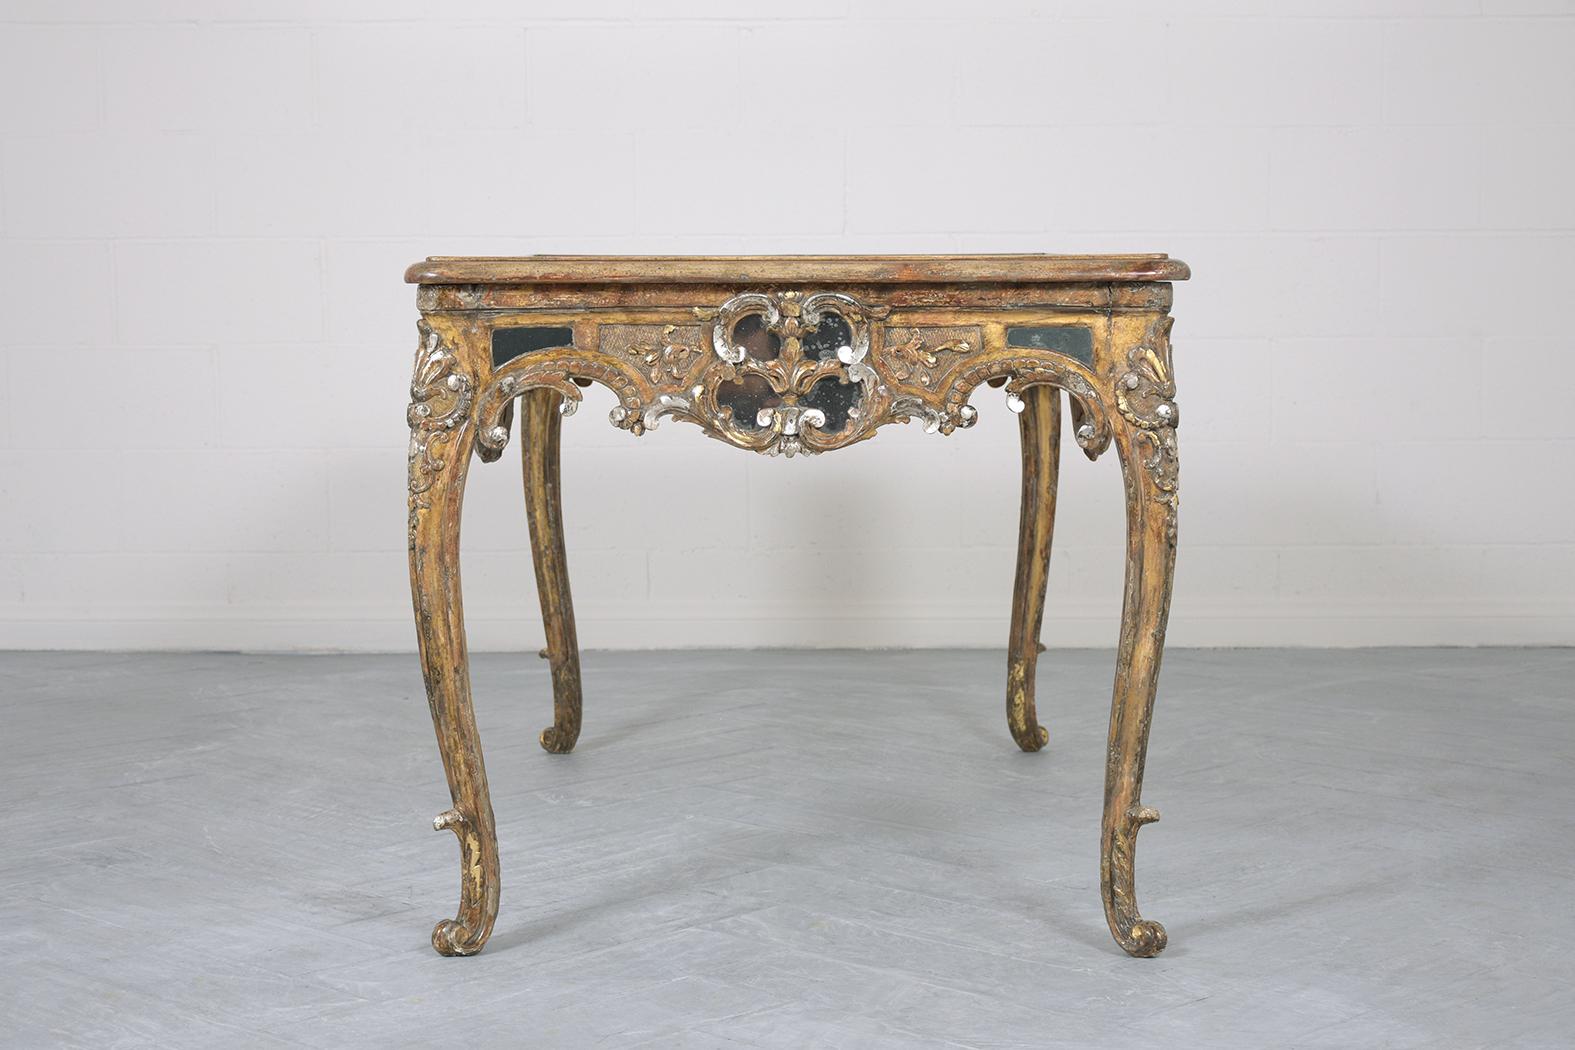 1830s Louis XVI Giltwood Center Table with Vintage Mirrored Top For Sale 3